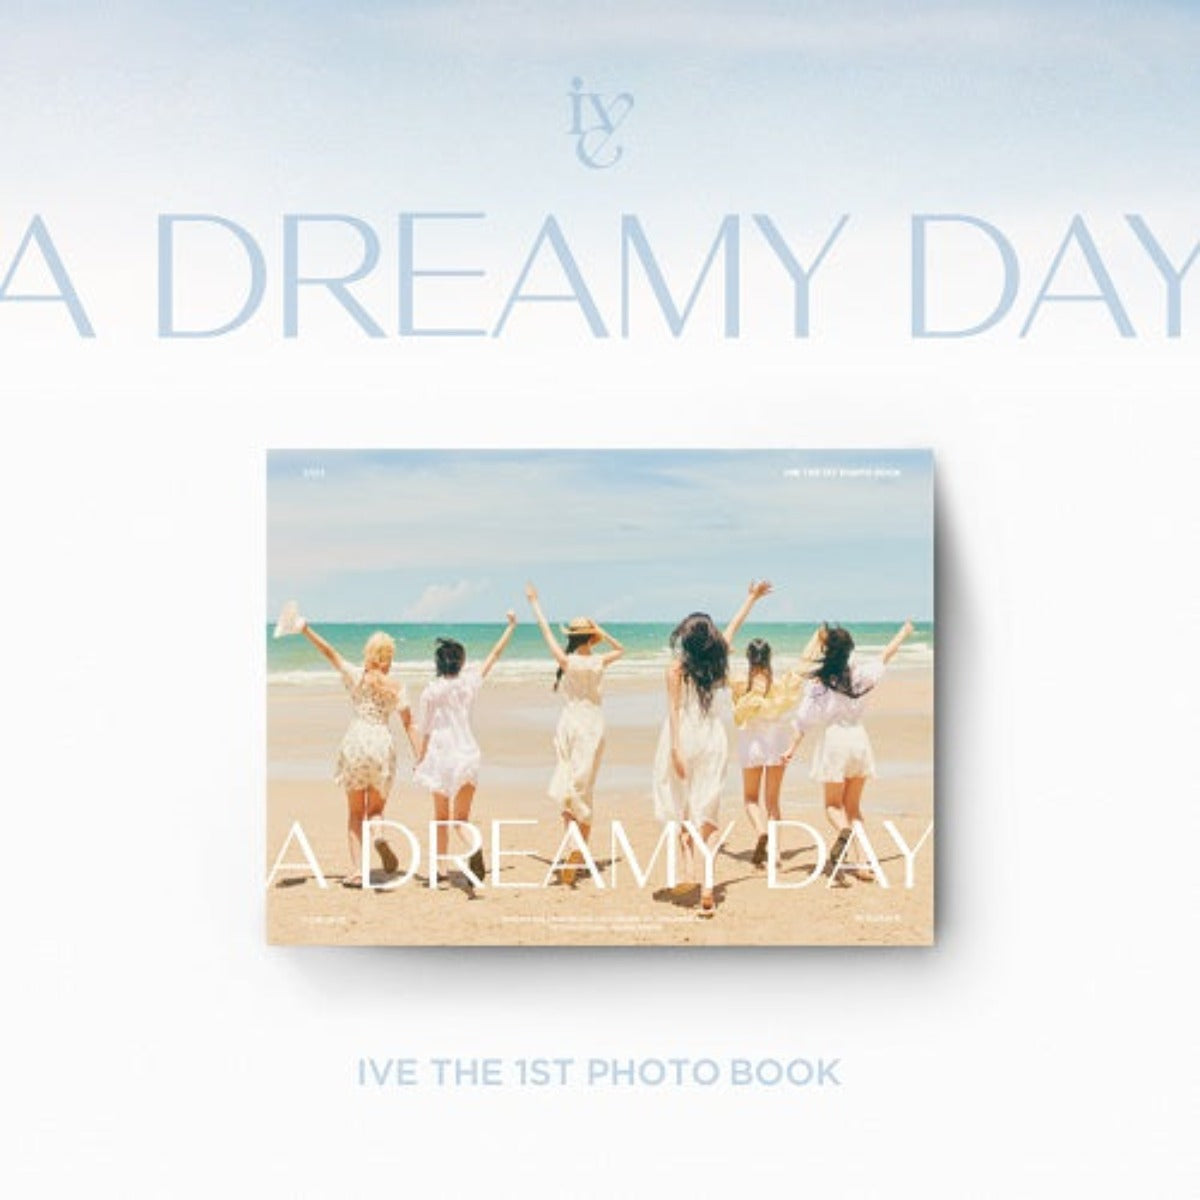 IVE - THE 1ST PHOTOBOOK_A DREAMY DAY